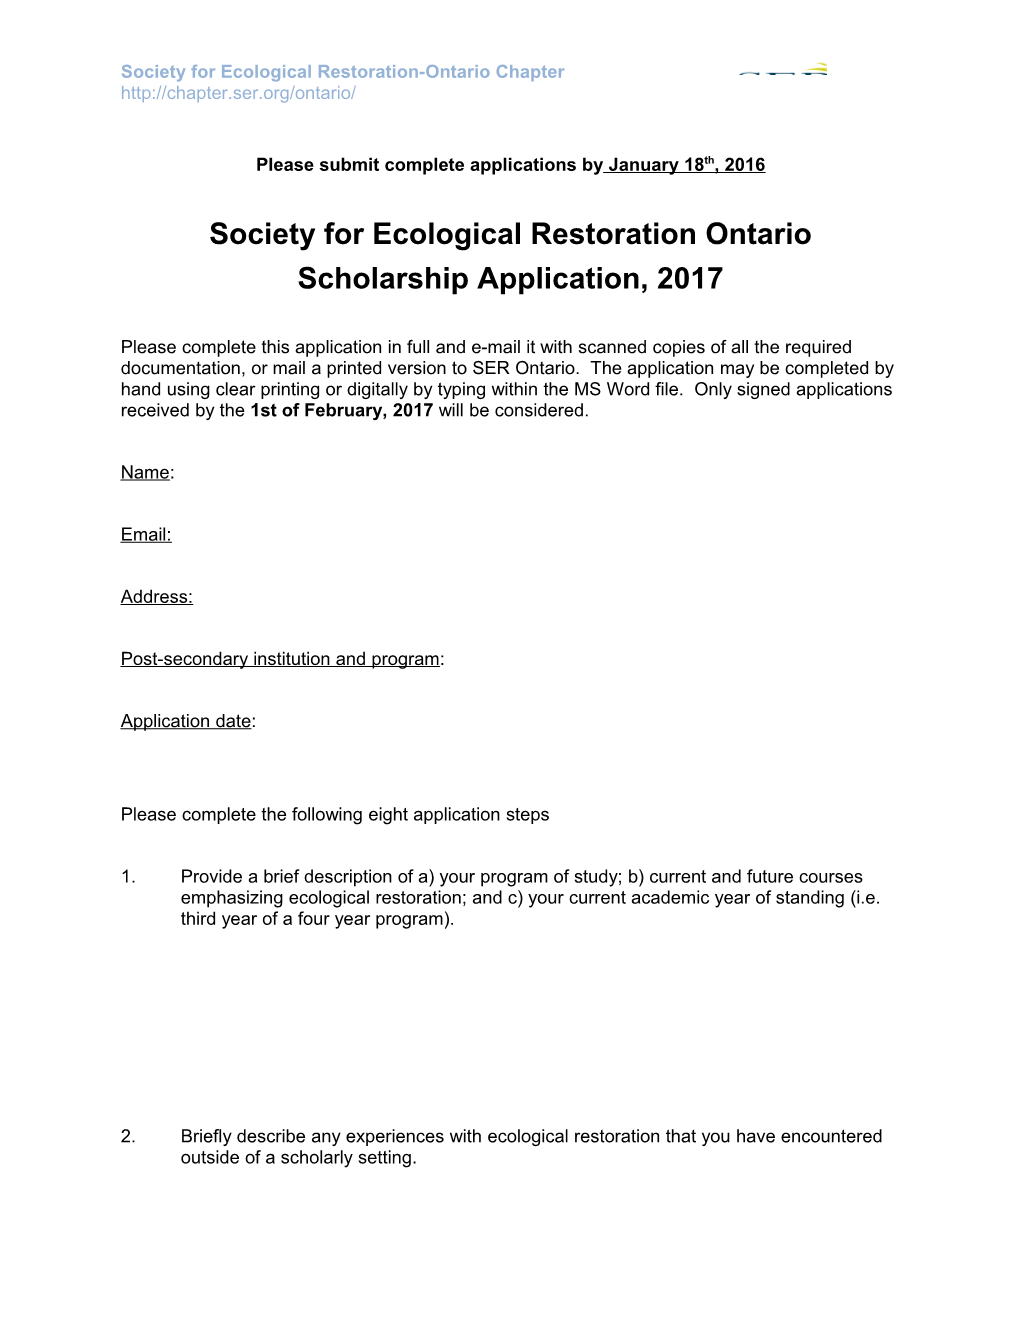 Society for Ecological Restoration Ontario